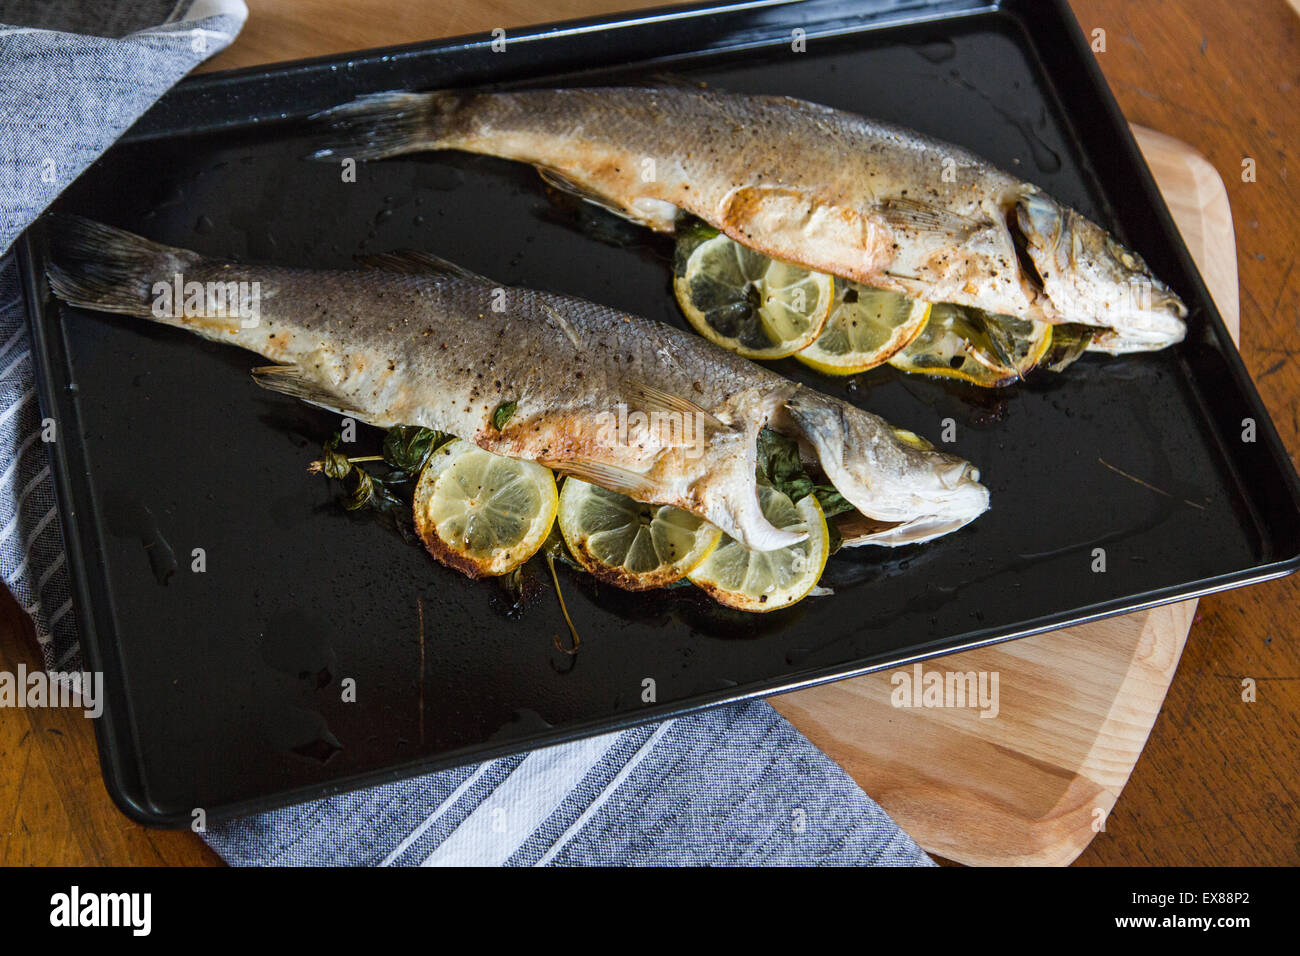 Oven Baked Sea Bass stuffed with basil and lemon, dinner, lunch, fish, roasted, healthy, Stock Photo